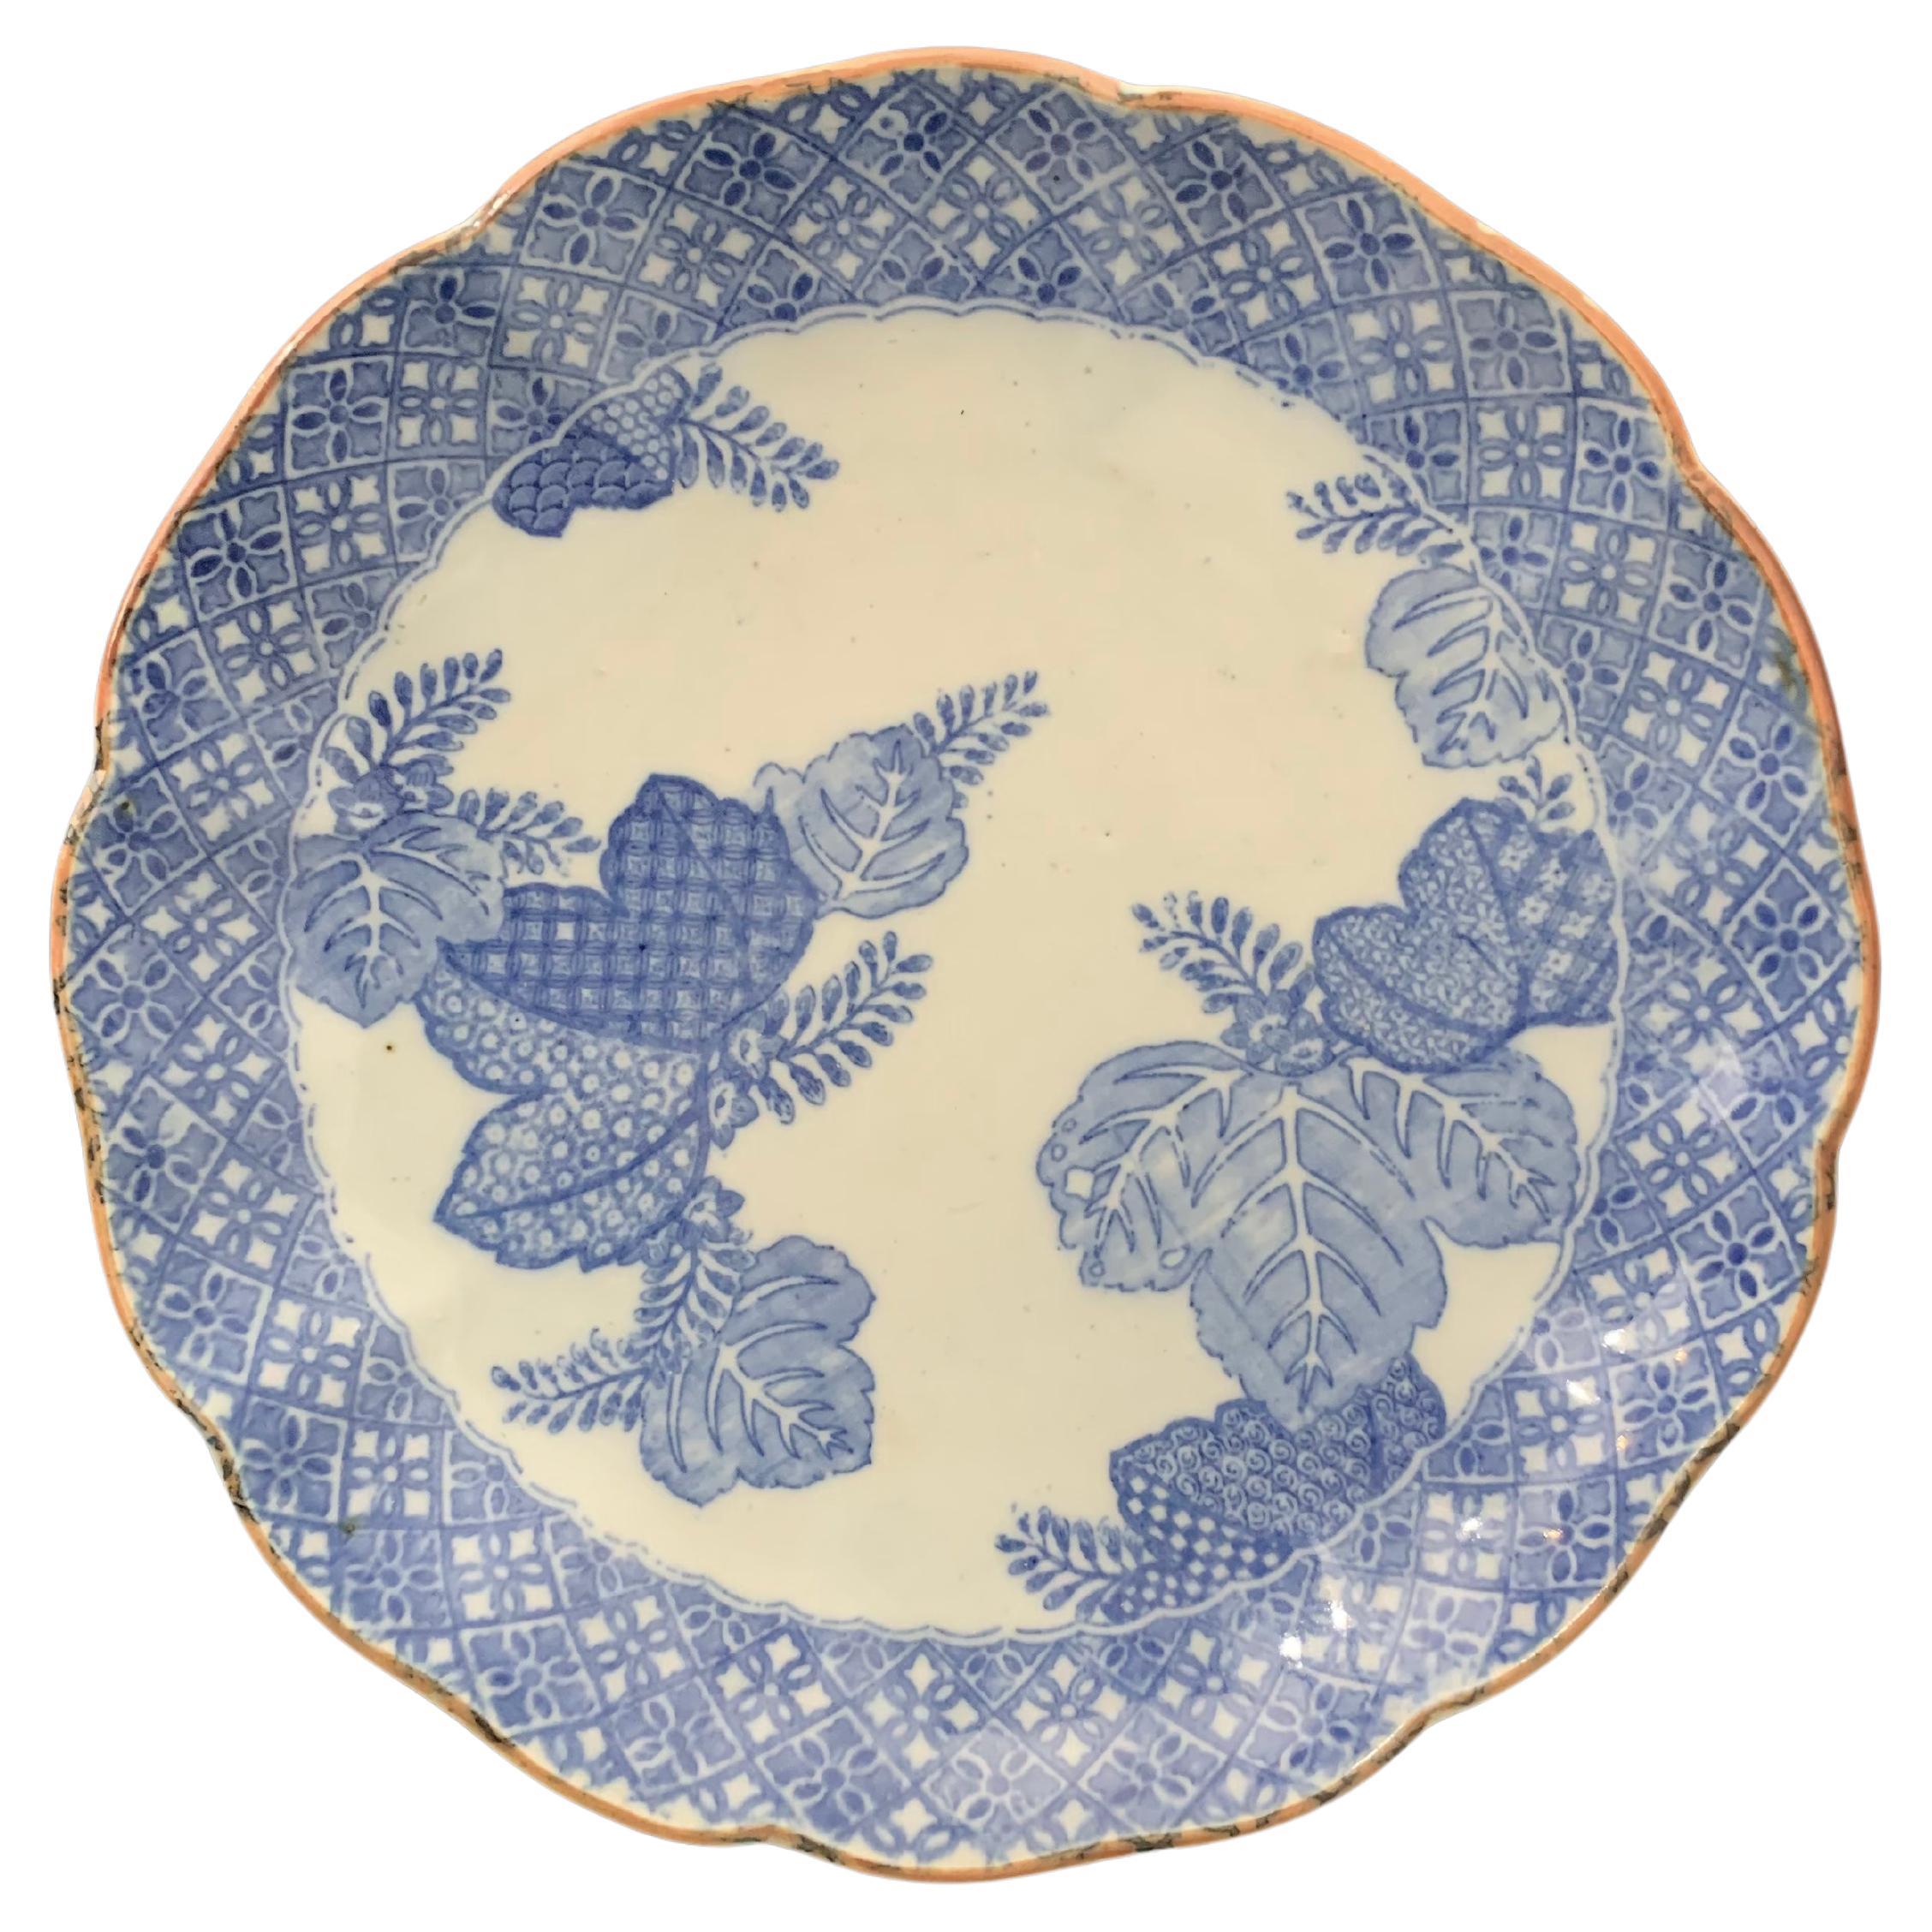 Chinese Soup Plate Inspired by the Blue Family India Compagny, Mid 19th Century